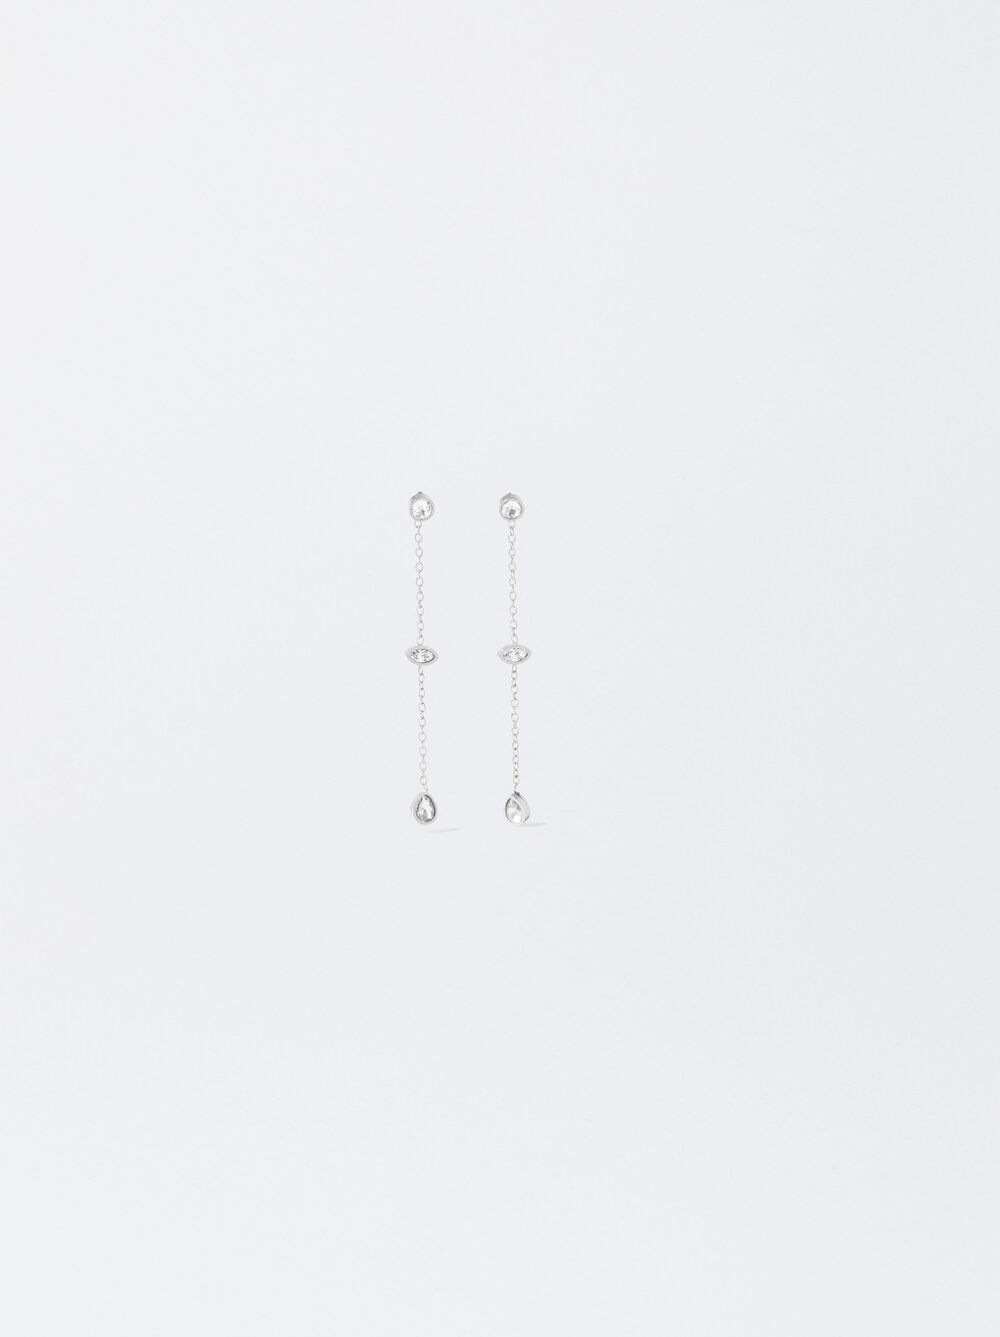 Stainless Steel Earrings With Crystals